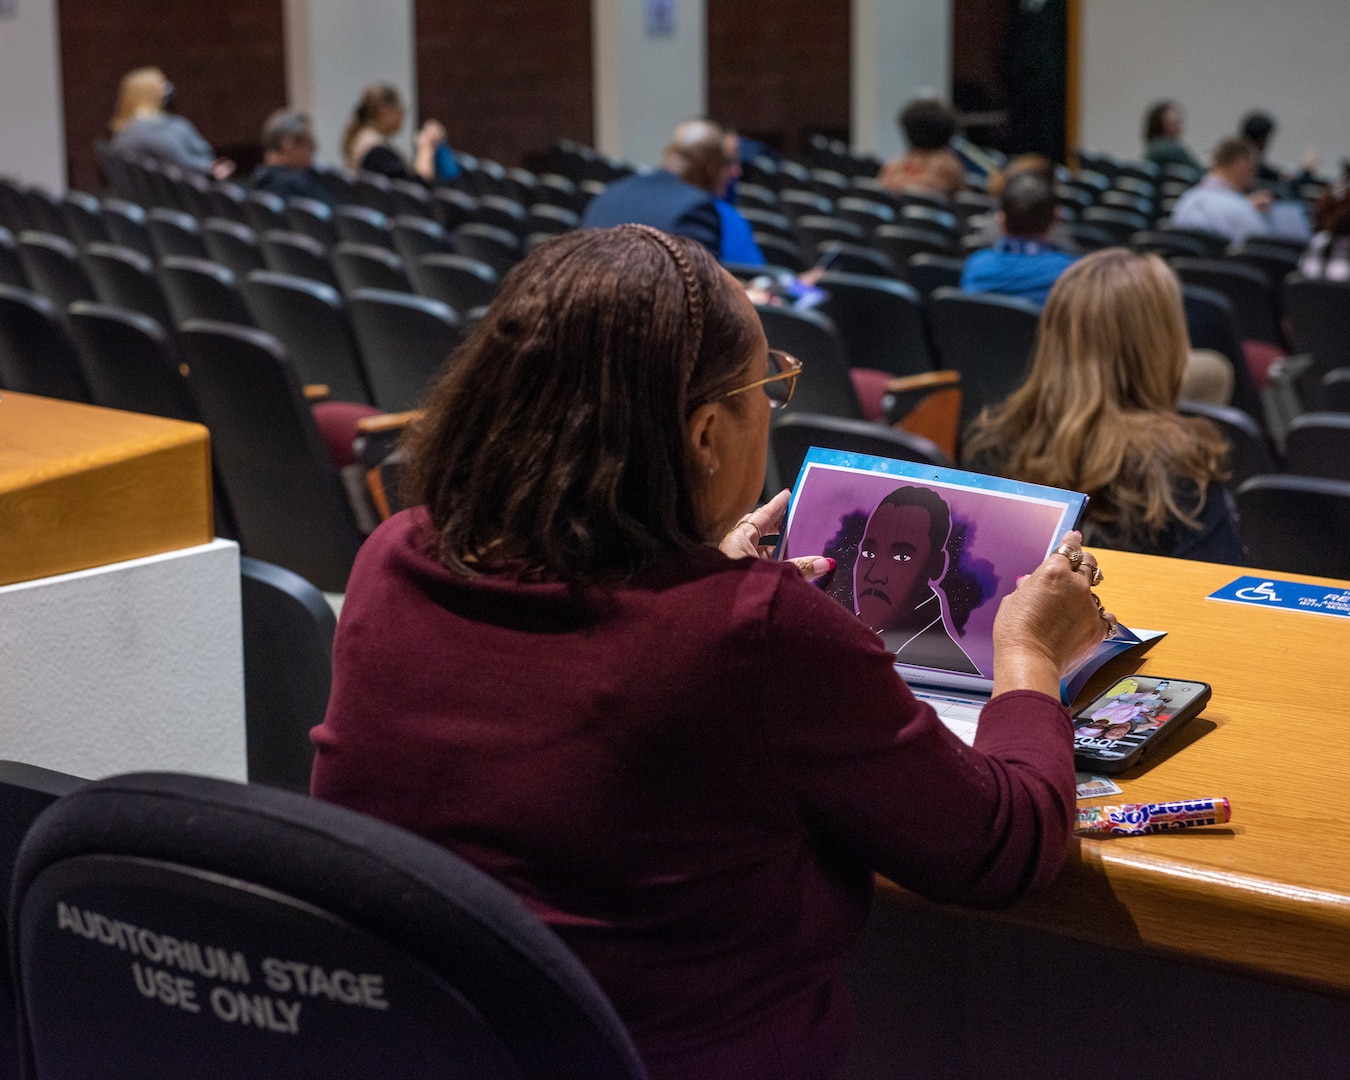 A dark skinned woman wearing a purple sweater looks at a glossy calendar in an auditorium.